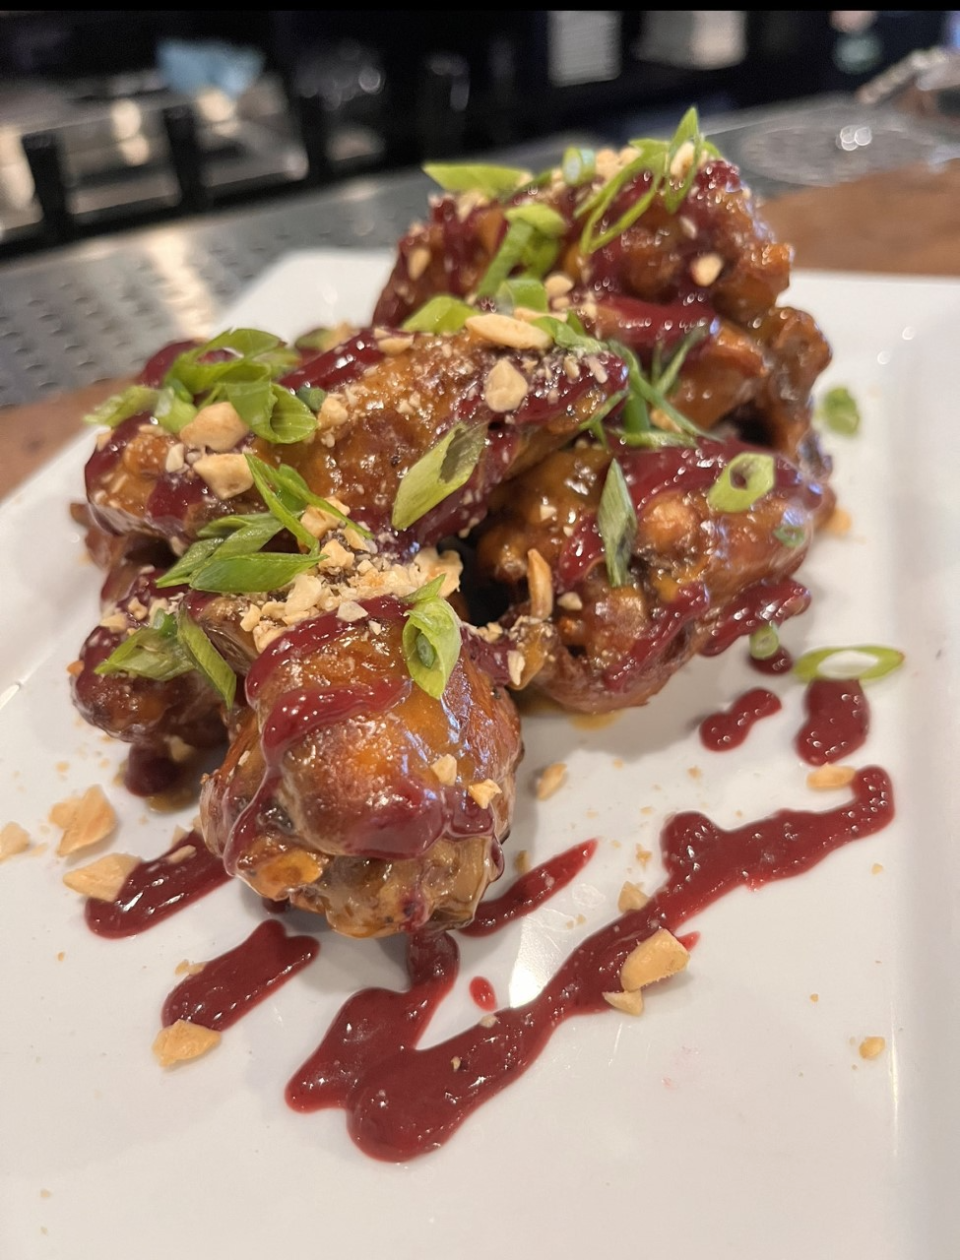 These PB&J wings are a Wing of the Week special at Rehoboth Ale House in Rehoboth Beach.